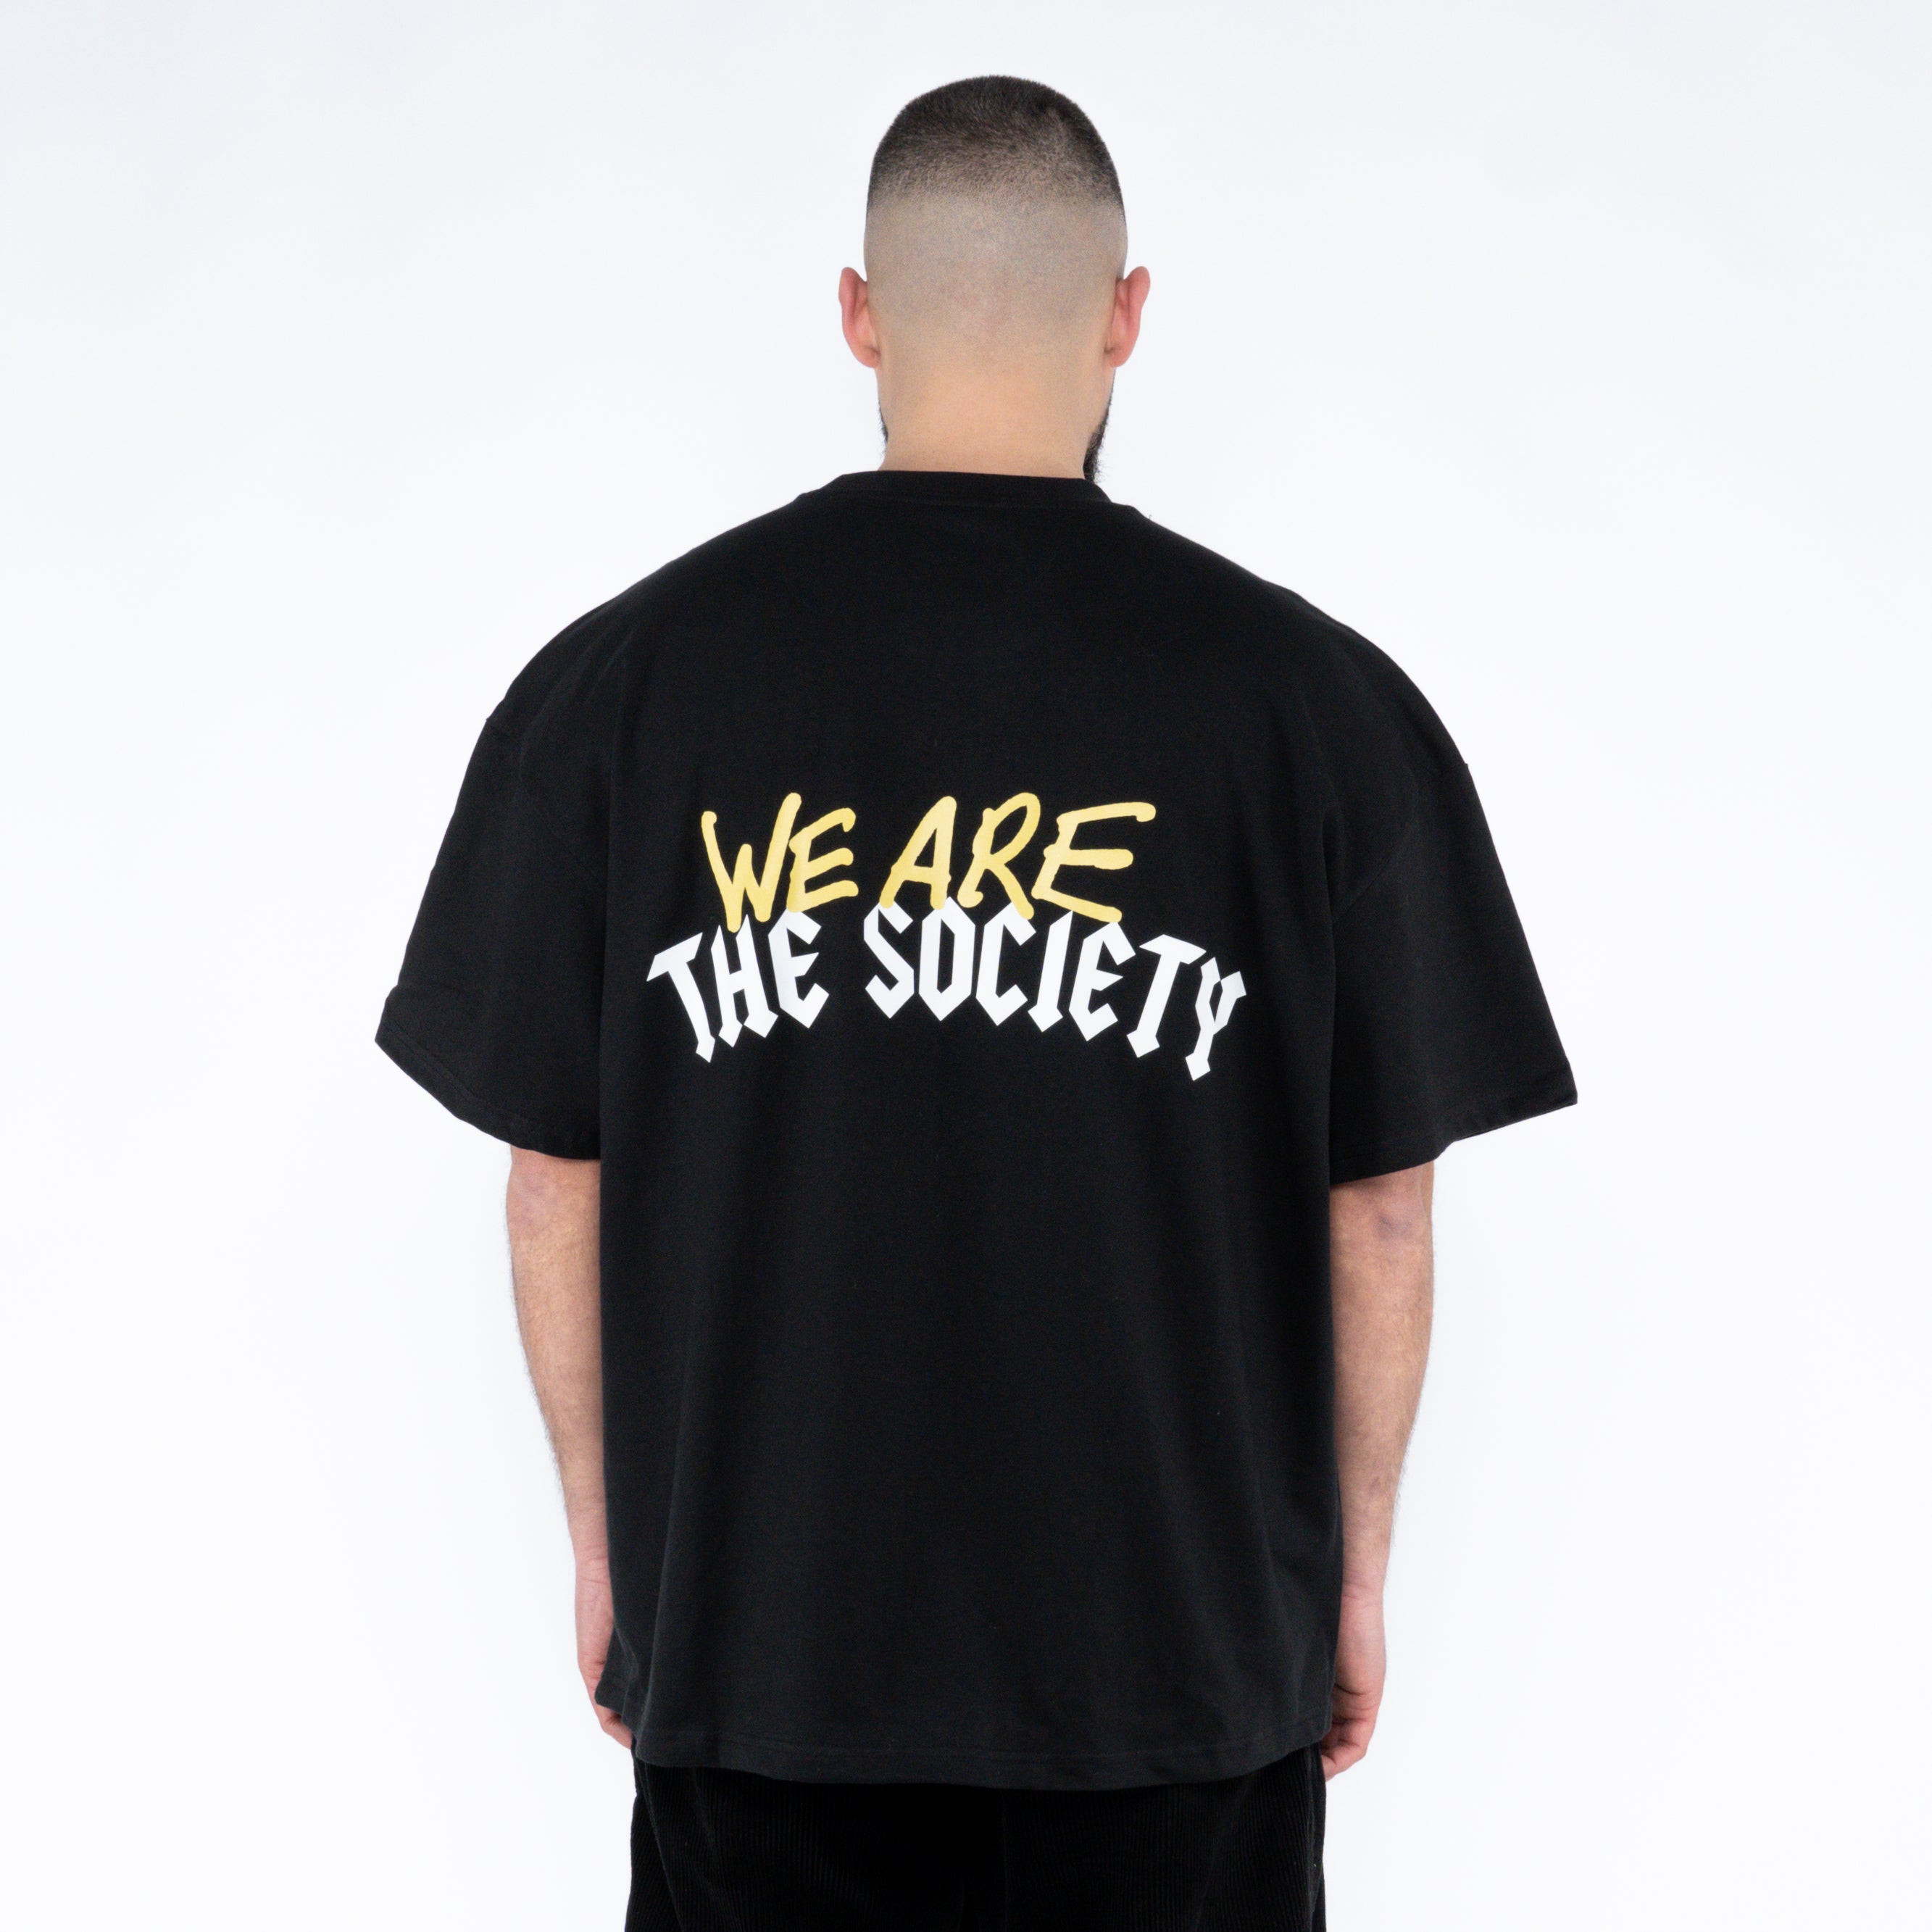 Smashed Society - We are the Society Tee